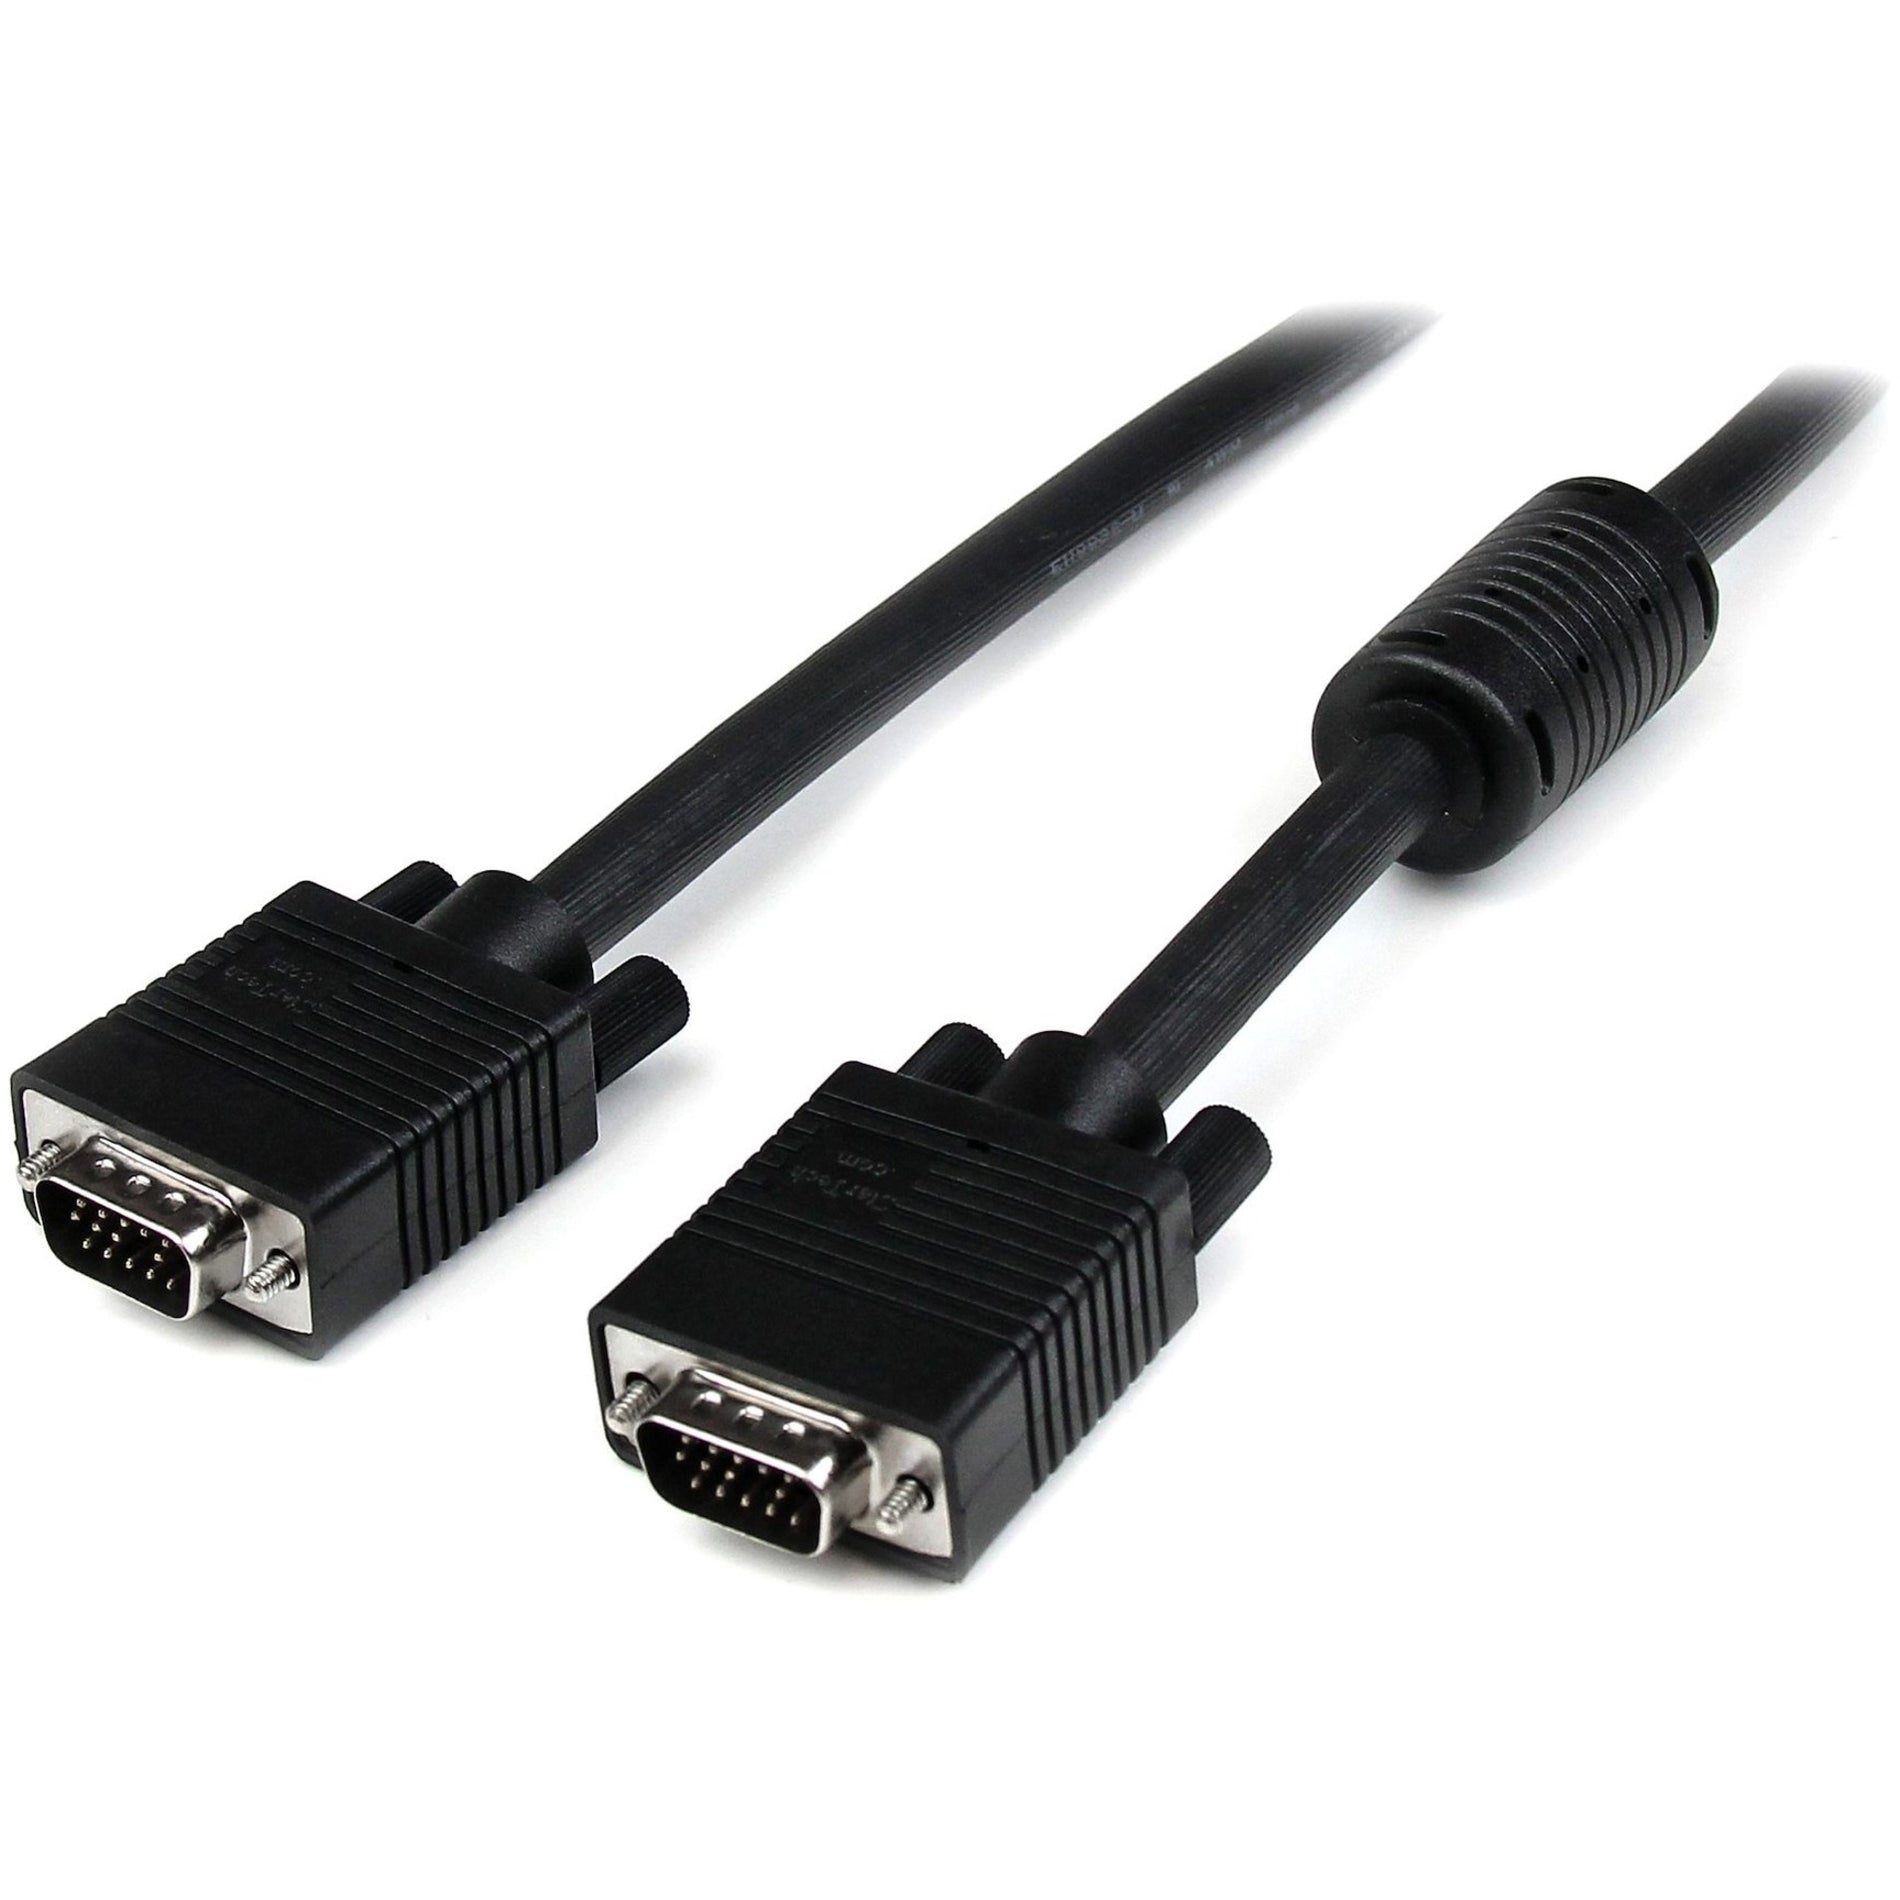 StarTech.com MXT101MMHQ50 High Resolution VGA Monitor Cable, 50ft Coaxial, Lifetime Warranty